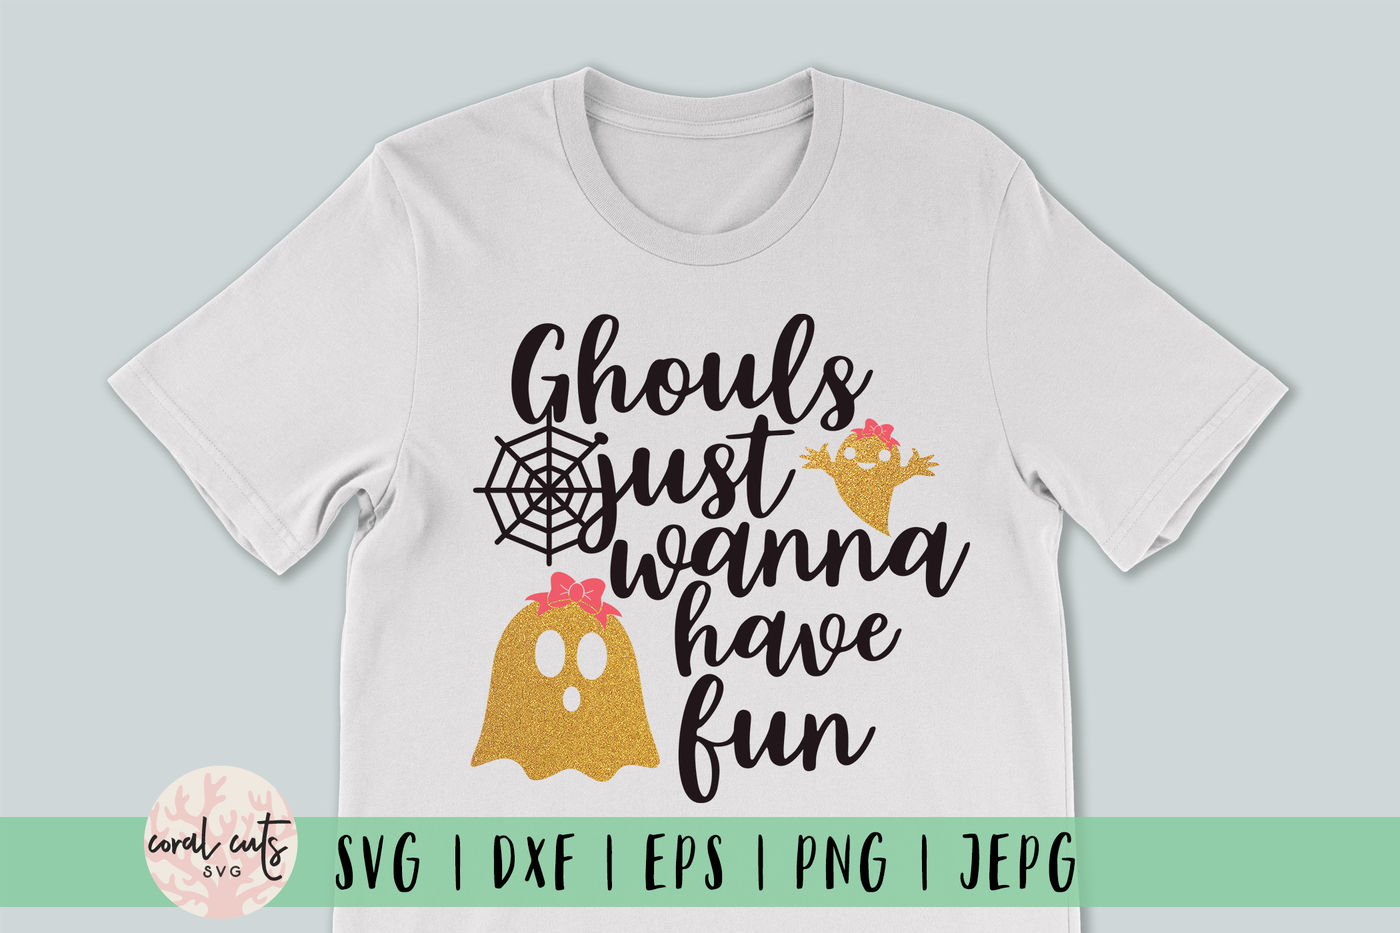 Ghouls Just Wanna Have Fun Halloween Svg Eps Dxf Png By Coralcuts Thehungryjpeg Com